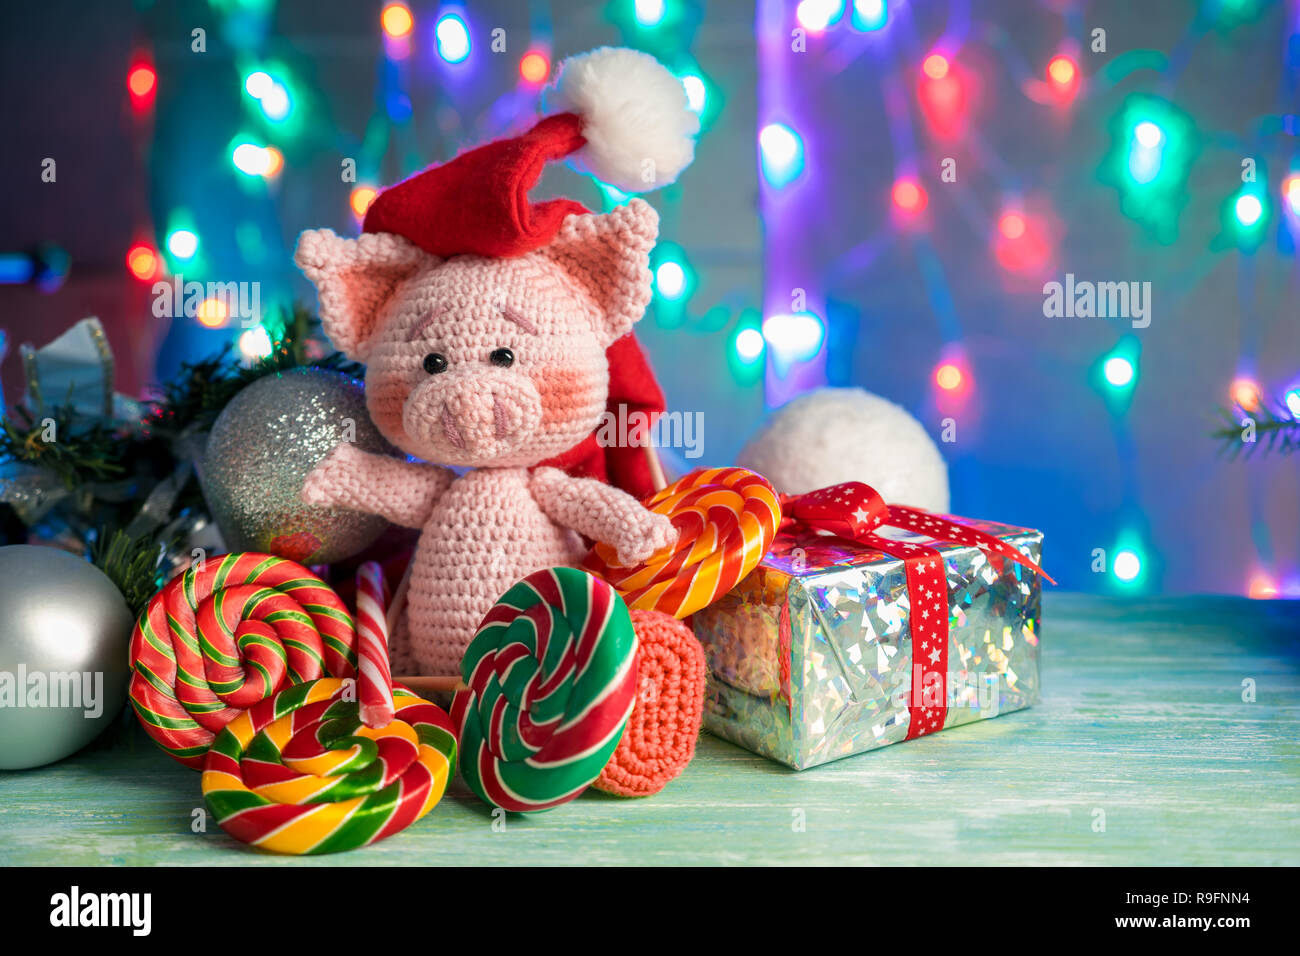 Funny greeting card with new year 2019. Pink pig with lollipops on background with illumination. Stock Photo